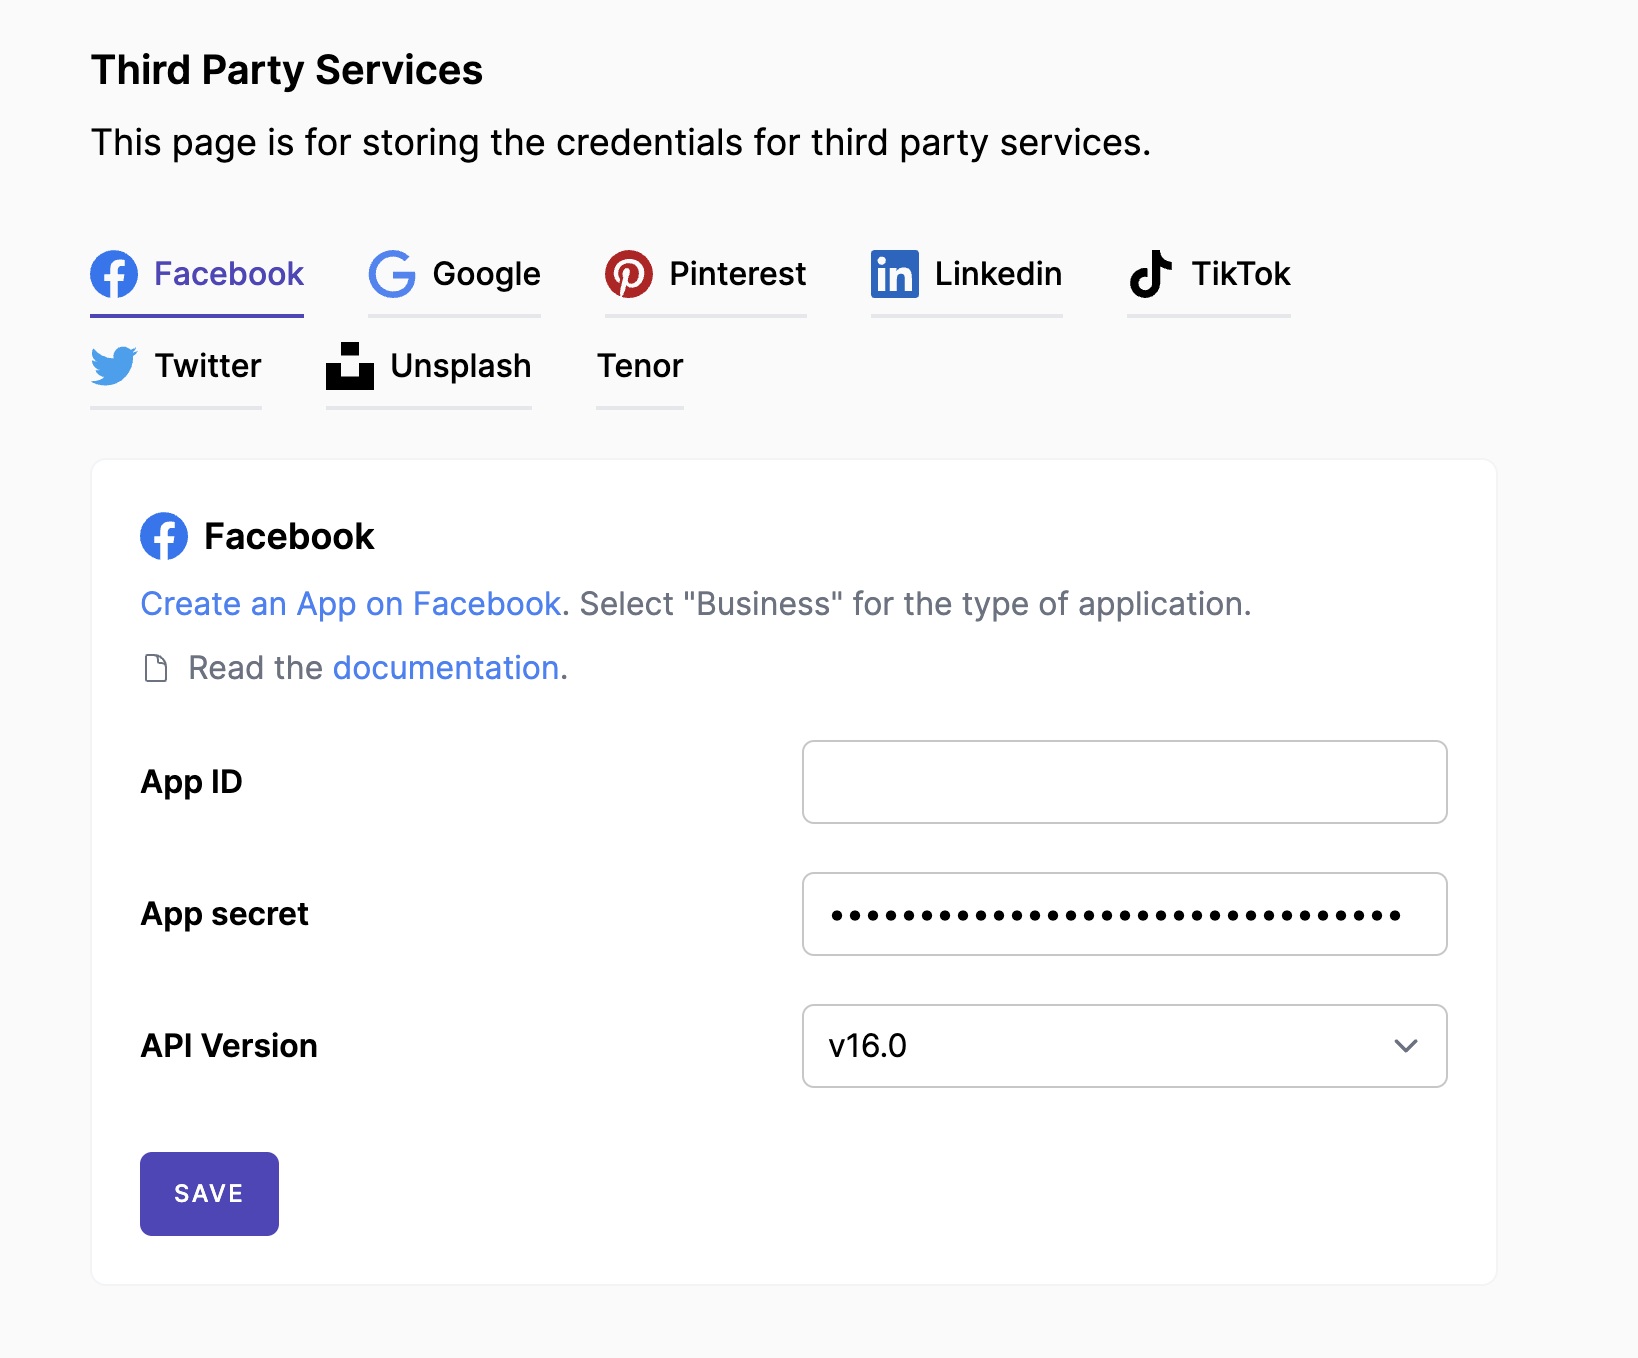 fb-third-party-service-form.png